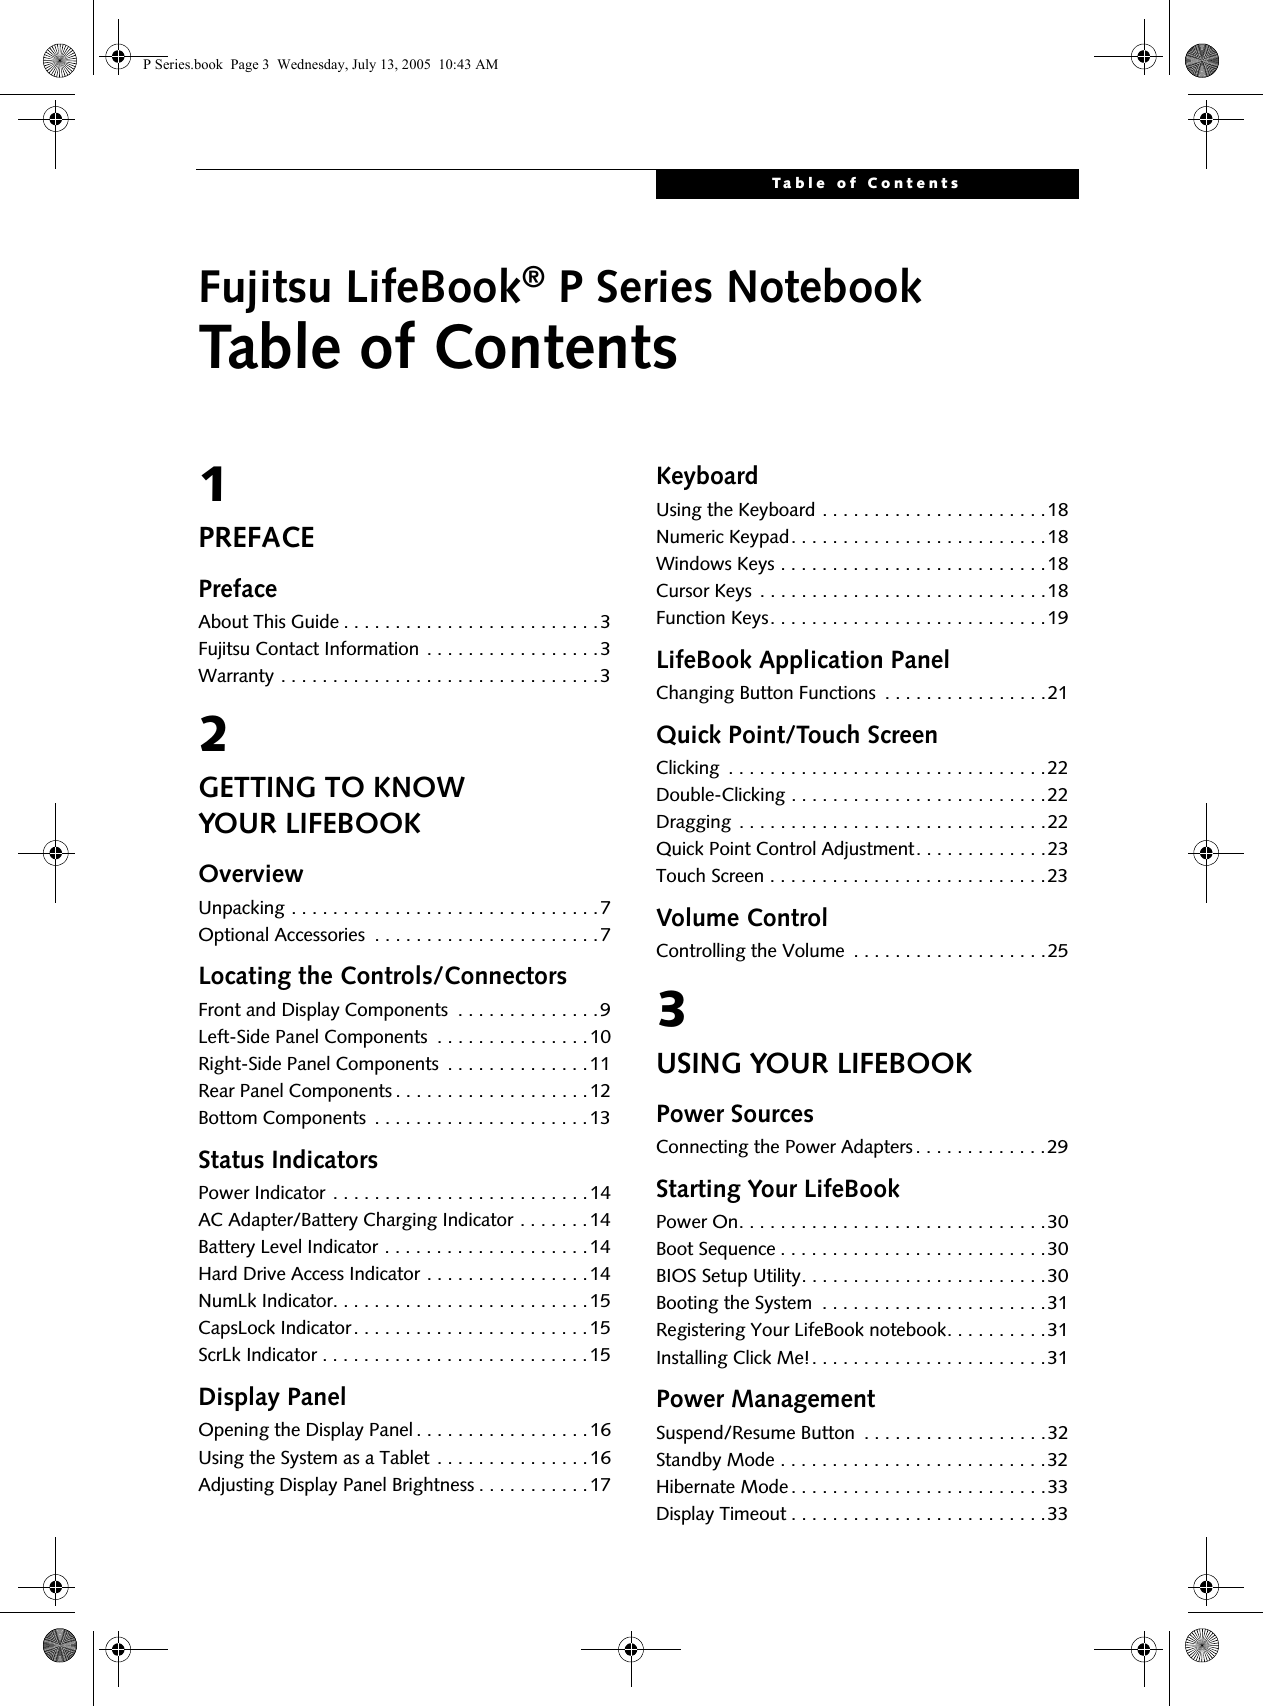 Table of ContentsFujitsu LifeBook® P Series NotebookTable of Contents1PREFACEPrefaceAbout This Guide . . . . . . . . . . . . . . . . . . . . . . . . .3Fujitsu Contact Information . . . . . . . . . . . . . . . . .3Warranty . . . . . . . . . . . . . . . . . . . . . . . . . . . . . . .32GETTING TO KNOWYOUR LIFEBOOKOverviewUnpacking . . . . . . . . . . . . . . . . . . . . . . . . . . . . . .7Optional Accessories  . . . . . . . . . . . . . . . . . . . . . .7Locating the Controls/ConnectorsFront and Display Components  . . . . . . . . . . . . . .9Left-Side Panel Components  . . . . . . . . . . . . . . .10Right-Side Panel Components  . . . . . . . . . . . . . .11Rear Panel Components . . . . . . . . . . . . . . . . . . .12Bottom Components  . . . . . . . . . . . . . . . . . . . . .13Status IndicatorsPower Indicator . . . . . . . . . . . . . . . . . . . . . . . . .14AC Adapter/Battery Charging Indicator . . . . . . .14Battery Level Indicator . . . . . . . . . . . . . . . . . . . .14Hard Drive Access Indicator . . . . . . . . . . . . . . . .14NumLk Indicator. . . . . . . . . . . . . . . . . . . . . . . . .15CapsLock Indicator. . . . . . . . . . . . . . . . . . . . . . .15ScrLk Indicator . . . . . . . . . . . . . . . . . . . . . . . . . .15Display PanelOpening the Display Panel . . . . . . . . . . . . . . . . .16Using the System as a Tablet . . . . . . . . . . . . . . .16Adjusting Display Panel Brightness . . . . . . . . . . .17KeyboardUsing the Keyboard . . . . . . . . . . . . . . . . . . . . . .18Numeric Keypad. . . . . . . . . . . . . . . . . . . . . . . . .18Windows Keys . . . . . . . . . . . . . . . . . . . . . . . . . .18Cursor Keys  . . . . . . . . . . . . . . . . . . . . . . . . . . . .18Function Keys. . . . . . . . . . . . . . . . . . . . . . . . . . .19LifeBook Application PanelChanging Button Functions  . . . . . . . . . . . . . . . .21Quick Point/Touch ScreenClicking  . . . . . . . . . . . . . . . . . . . . . . . . . . . . . . .22Double-Clicking . . . . . . . . . . . . . . . . . . . . . . . . .22Dragging  . . . . . . . . . . . . . . . . . . . . . . . . . . . . . .22Quick Point Control Adjustment. . . . . . . . . . . . .23Touch Screen . . . . . . . . . . . . . . . . . . . . . . . . . . .23Volume ControlControlling the Volume  . . . . . . . . . . . . . . . . . . .253USING YOUR LIFEBOOKPower SourcesConnecting the Power Adapters . . . . . . . . . . . . .29Starting Your LifeBookPower On. . . . . . . . . . . . . . . . . . . . . . . . . . . . . .30Boot Sequence . . . . . . . . . . . . . . . . . . . . . . . . . .30BIOS Setup Utility. . . . . . . . . . . . . . . . . . . . . . . .30Booting the System  . . . . . . . . . . . . . . . . . . . . . .31Registering Your LifeBook notebook. . . . . . . . . .31Installing Click Me!. . . . . . . . . . . . . . . . . . . . . . .31Power ManagementSuspend/Resume Button  . . . . . . . . . . . . . . . . . .32Standby Mode . . . . . . . . . . . . . . . . . . . . . . . . . .32Hibernate Mode . . . . . . . . . . . . . . . . . . . . . . . . .33Display Timeout . . . . . . . . . . . . . . . . . . . . . . . . .33P Series.book  Page 3  Wednesday, July 13, 2005  10:43 AM